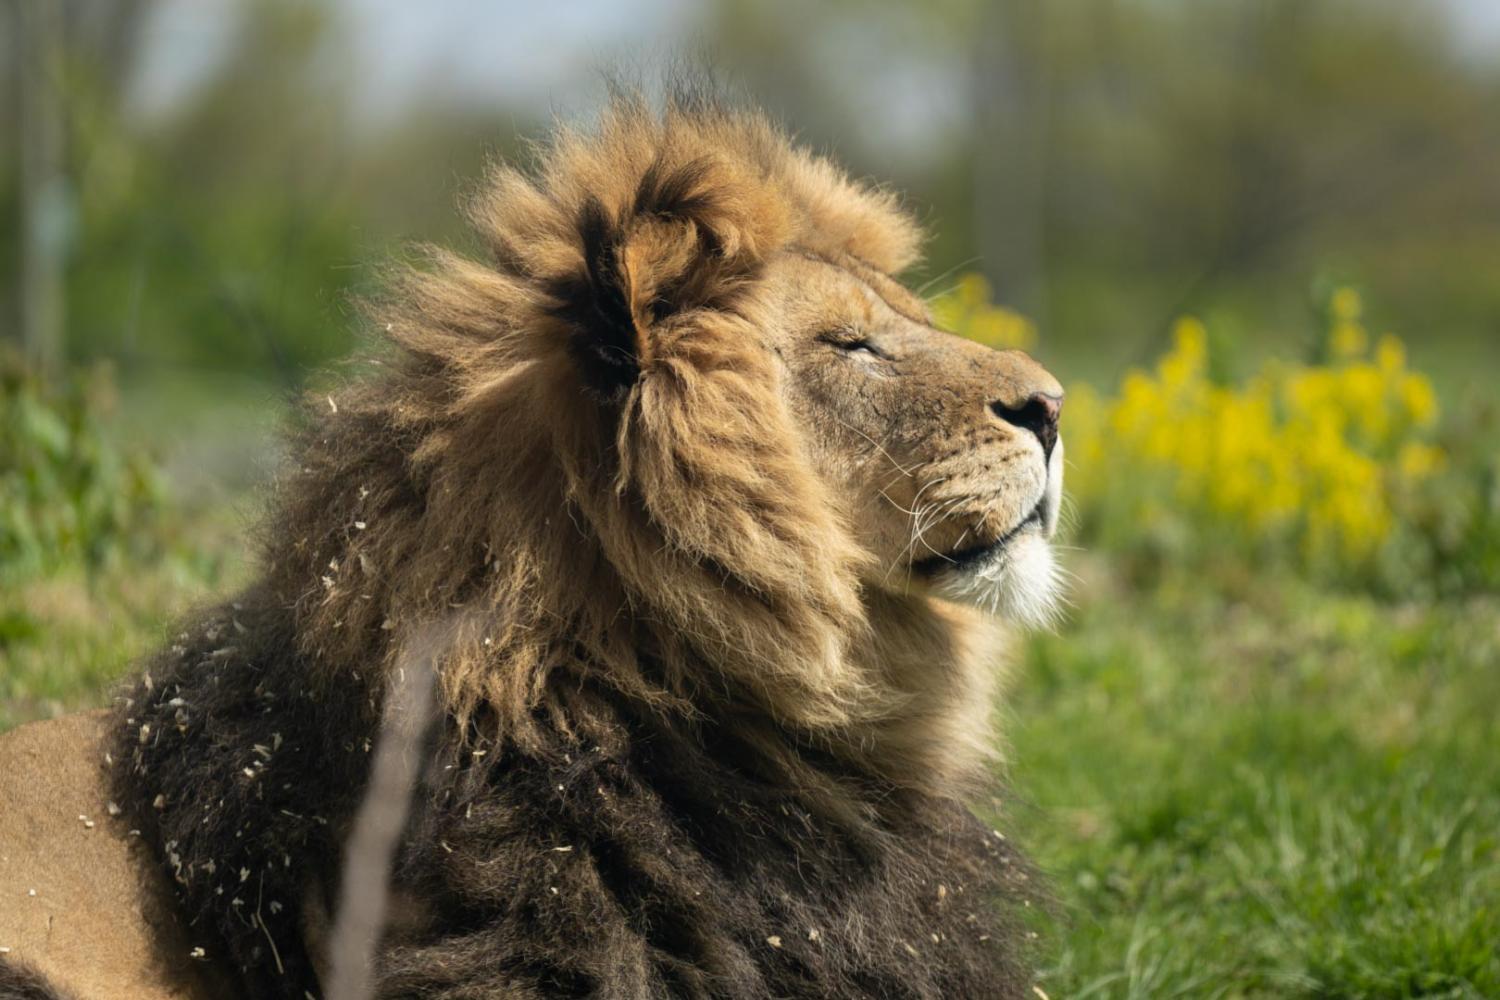 Profile image of male African lion's head